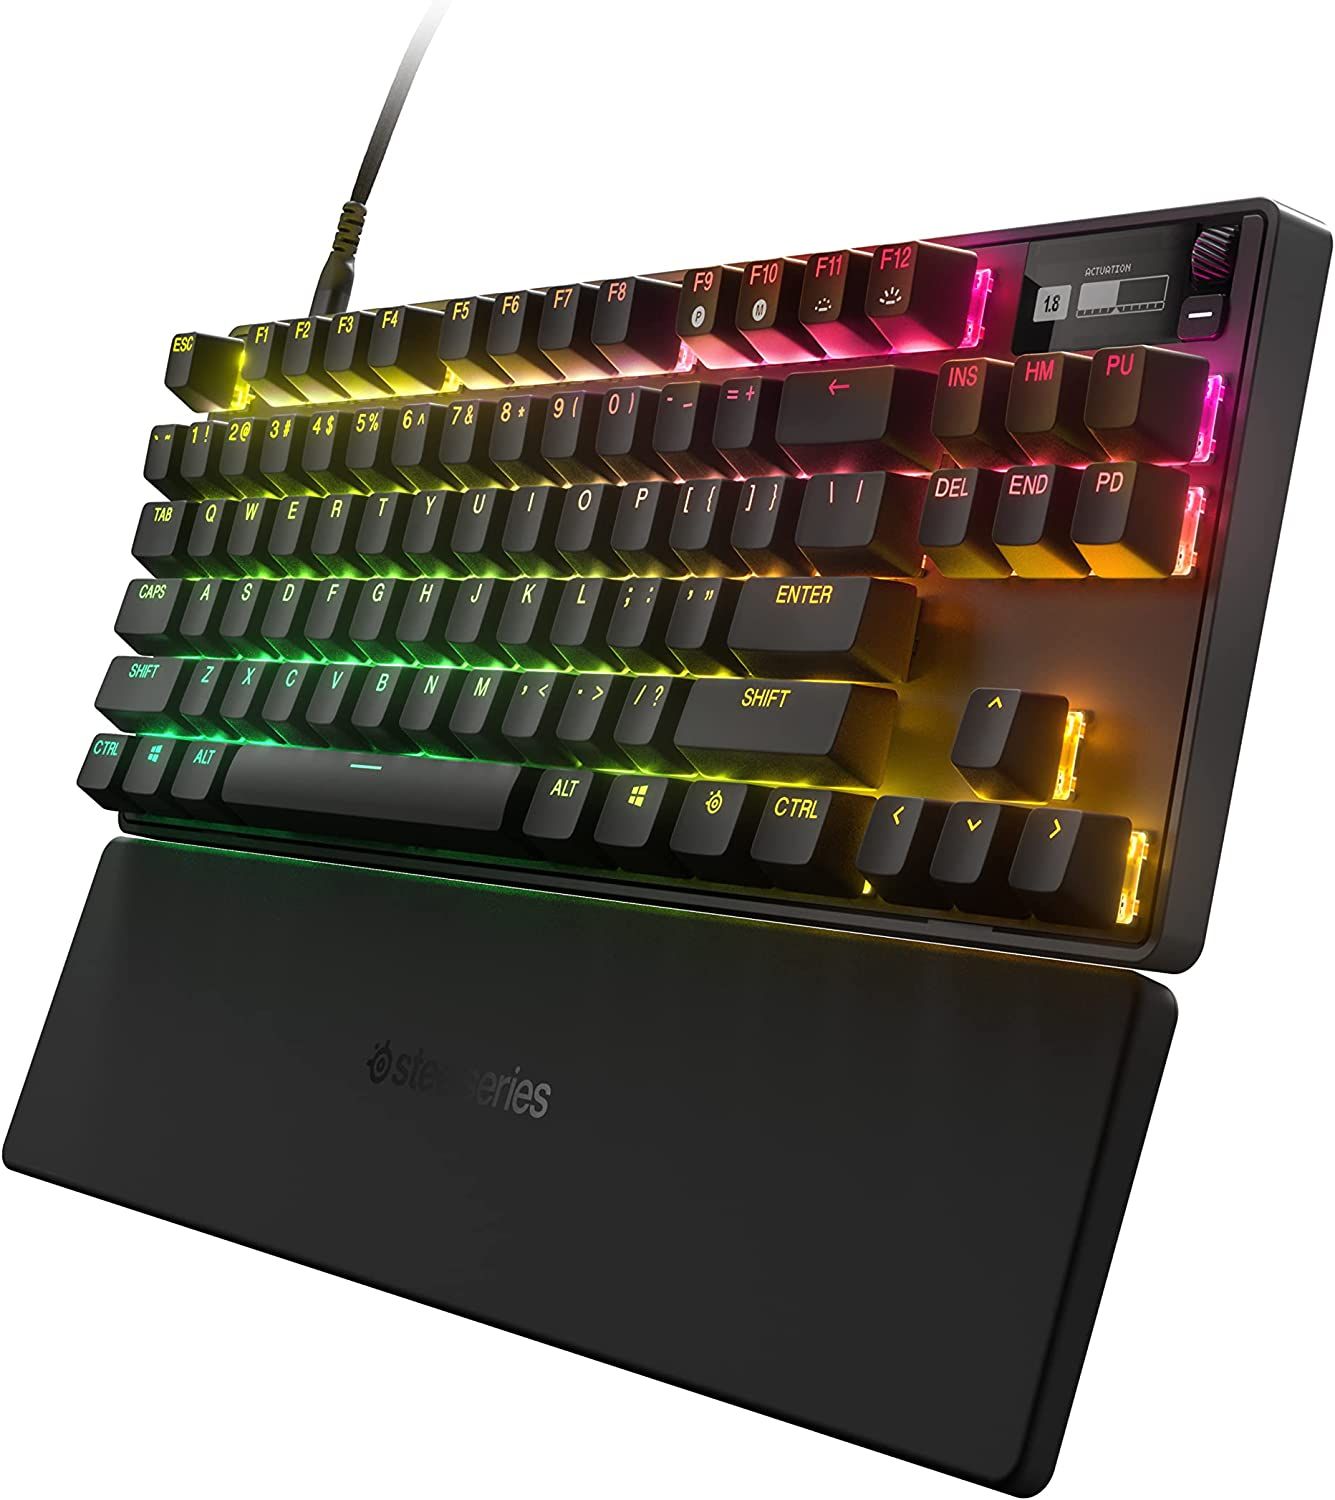 the steelseries apex pro tkl mechanical gaming keyboard with wristrest